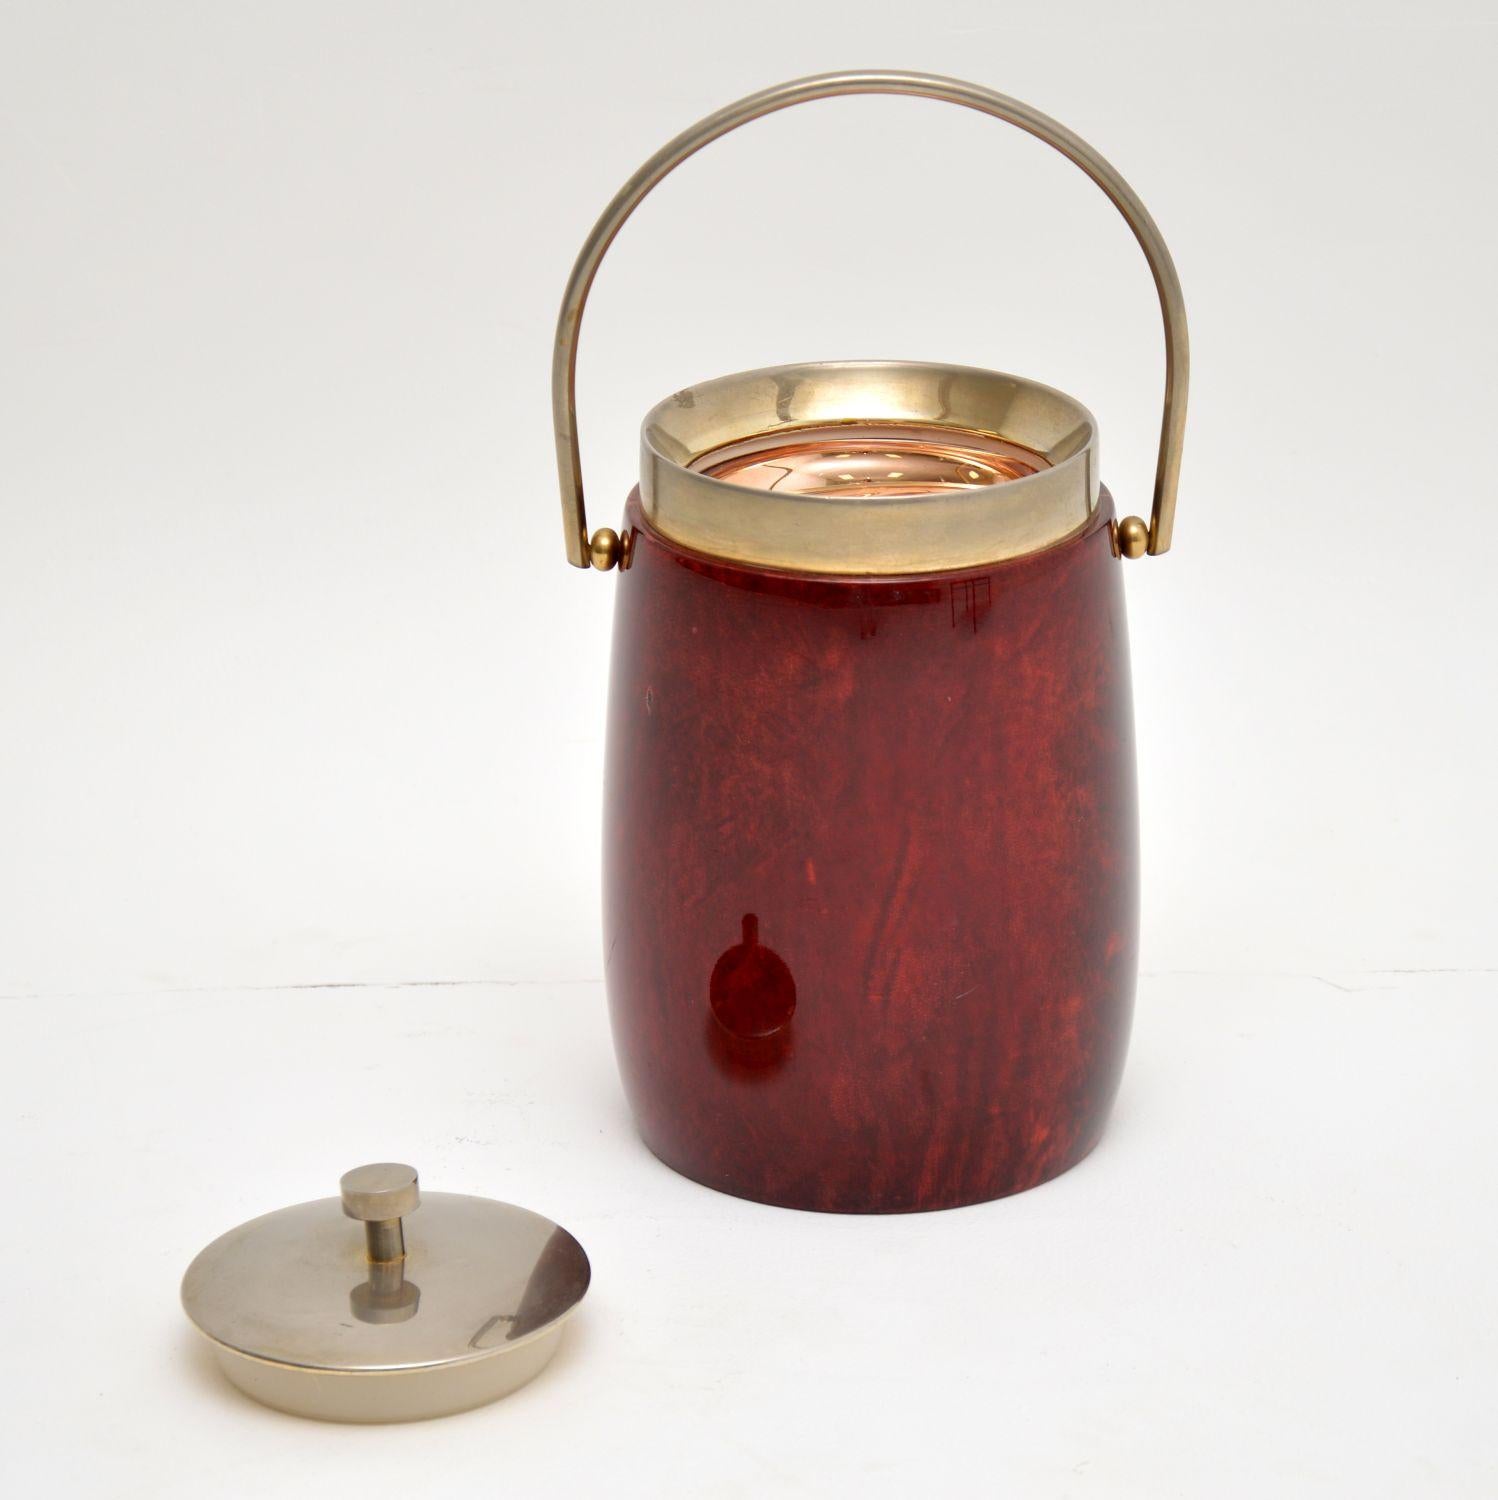 This vintage ice bucket was designed by Aldo Tura, it was made in Italy in the 1960s. It’s made from lacquered goat skin parchment and steel, with an insulated interior. This is in excellent original condition, with only some extremely minor surface